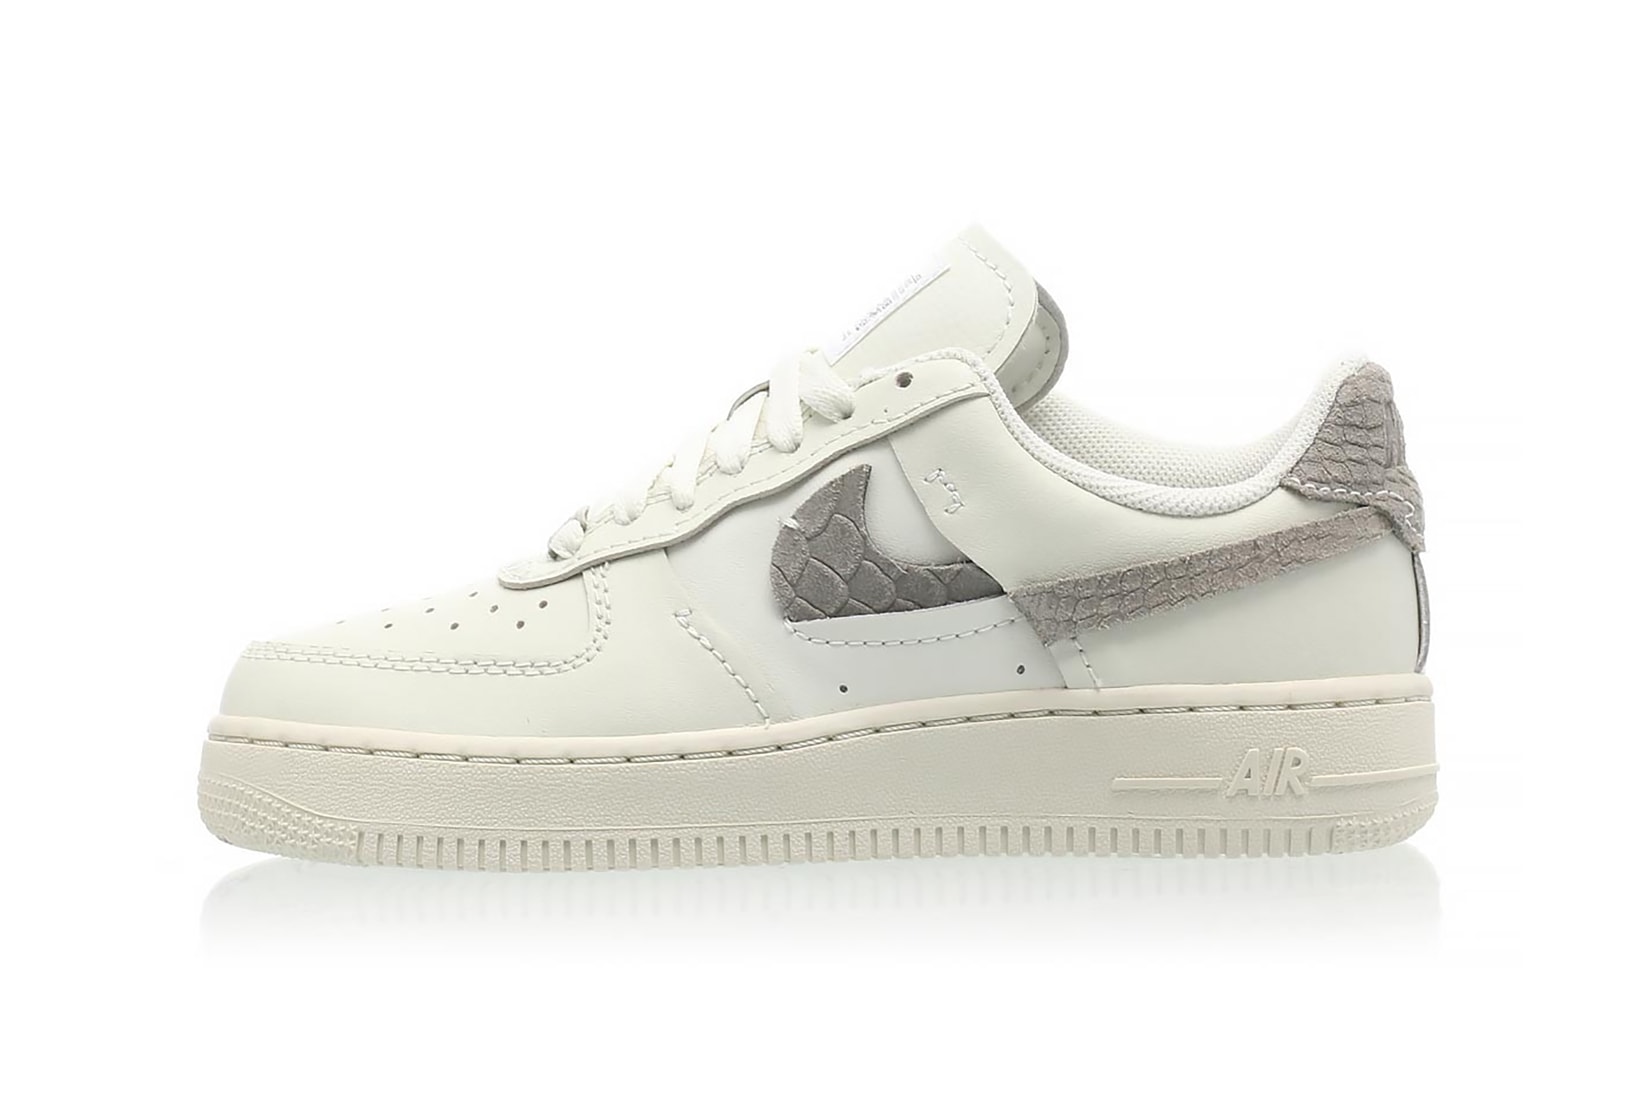 nike air force 1 af1 lxx sea glass womens sneakers gray silver white colorway shoes footwear kicks sneakerhead lateral